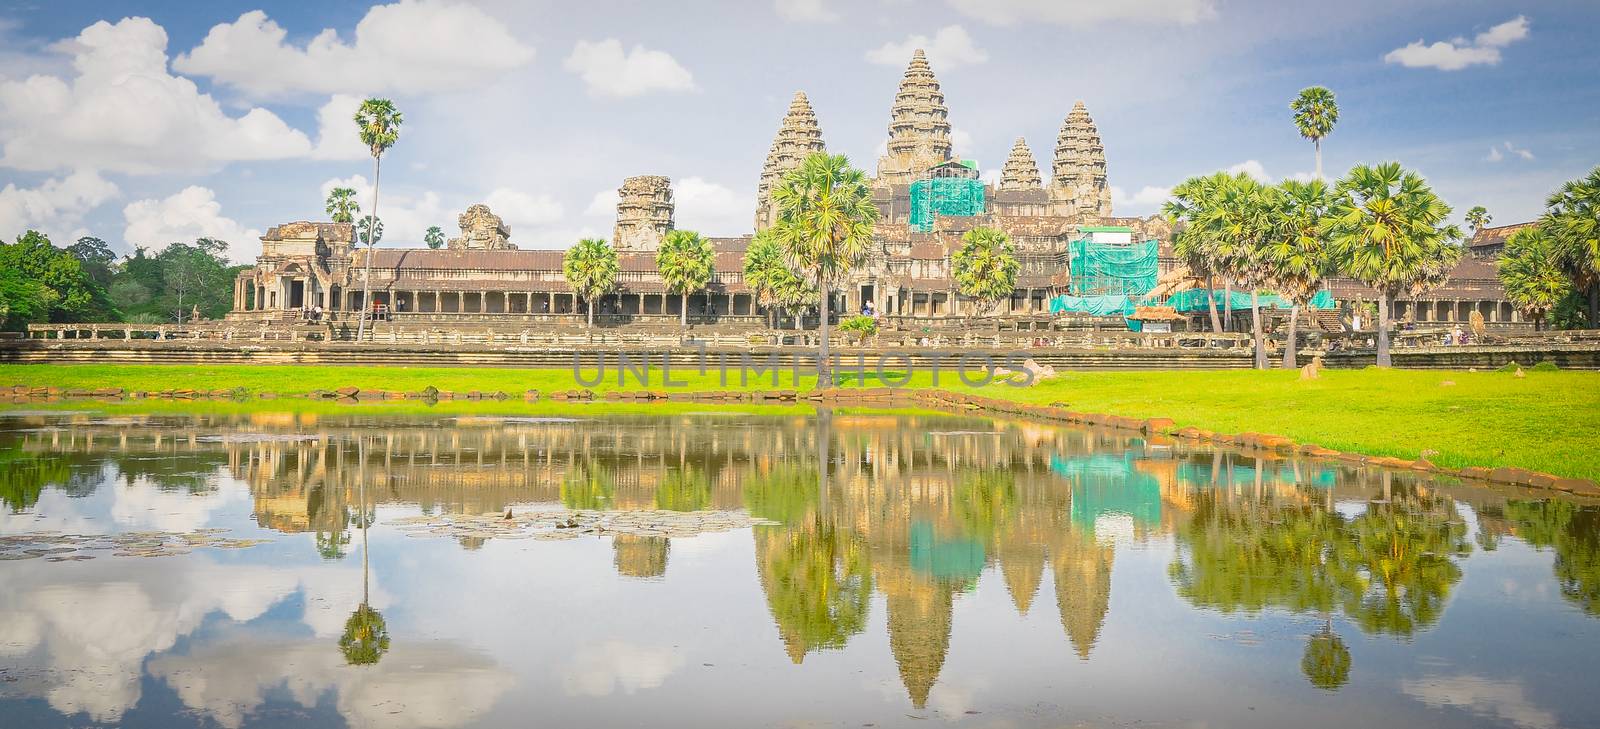 Angkor Wat temple complex reflection on the lake under summer cloud blue sky. Ancient Khmer architecture in Cambodia and is the largest religious monument in the world.